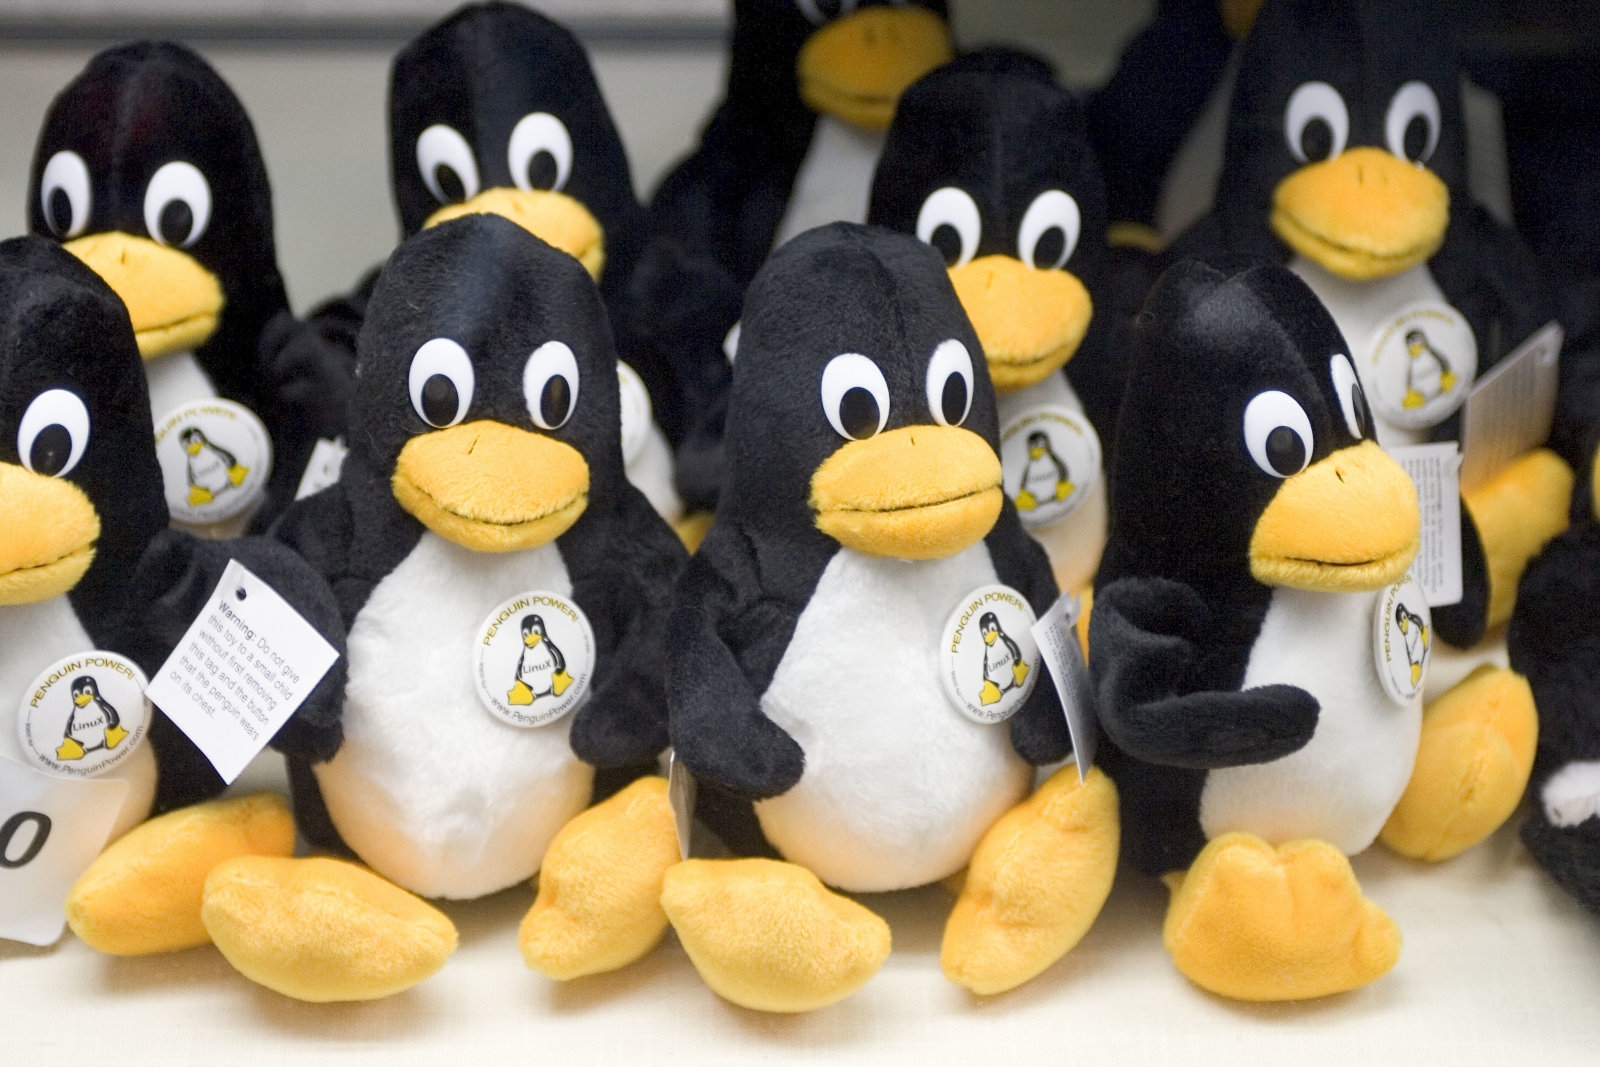 Munich ends its long-running love affair with Linux | DeviceDaily.com